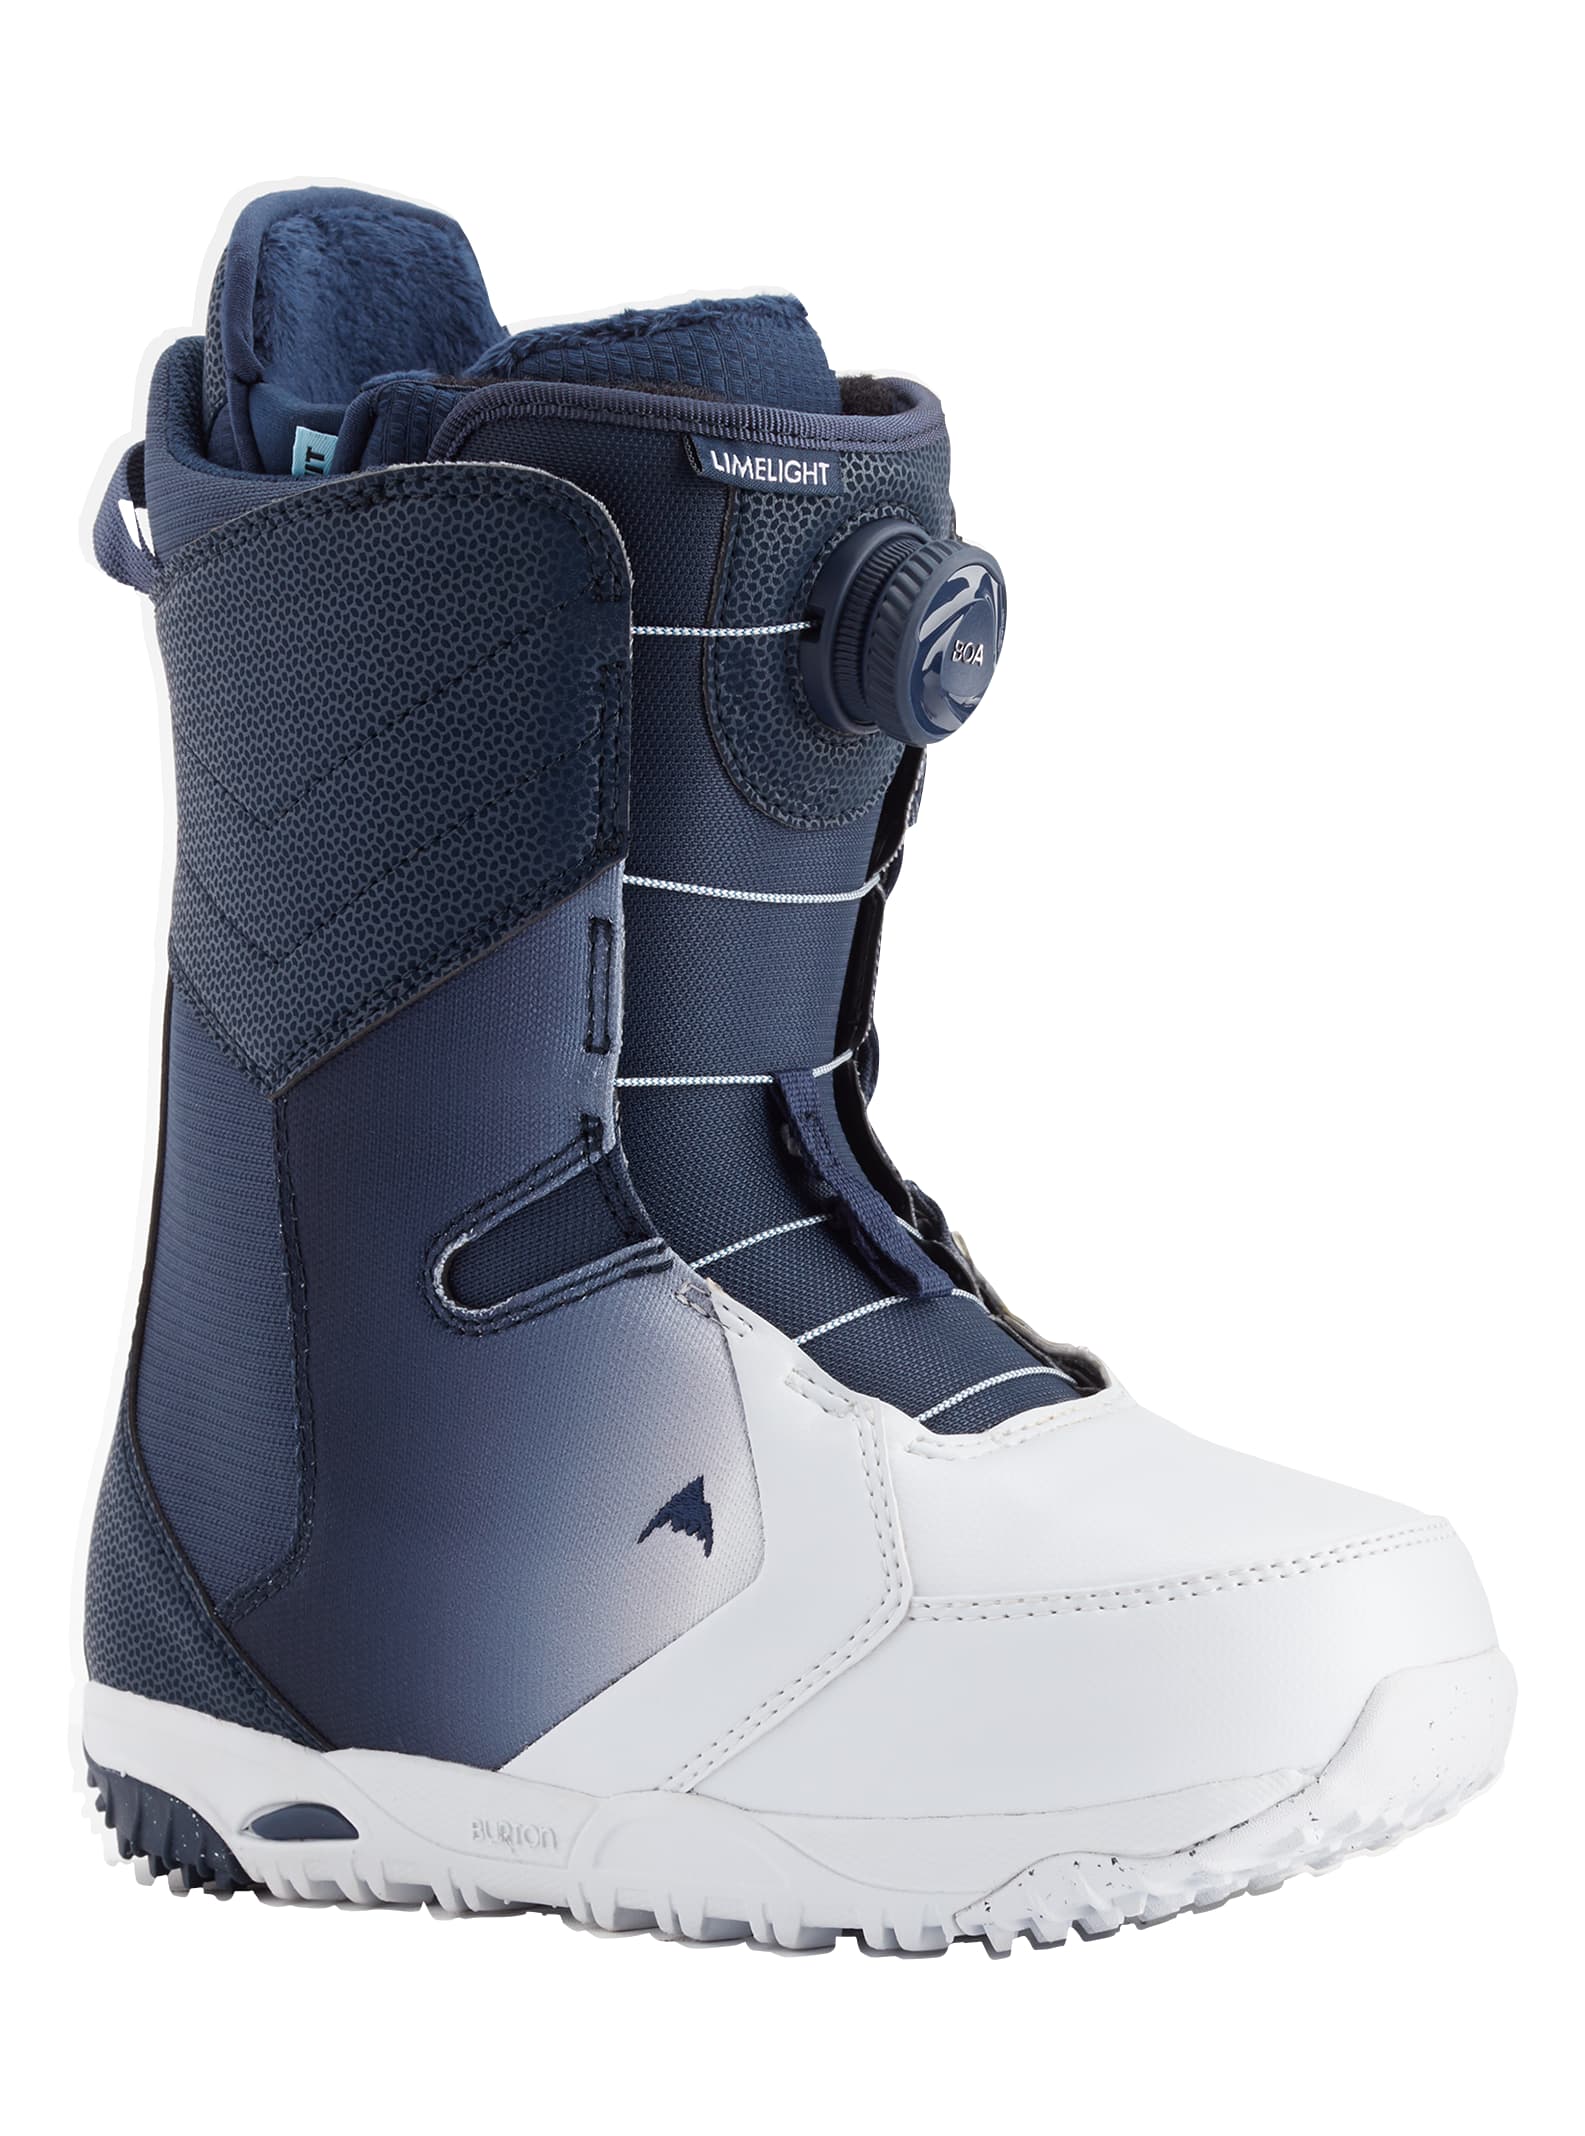 womens snowboard boots canada